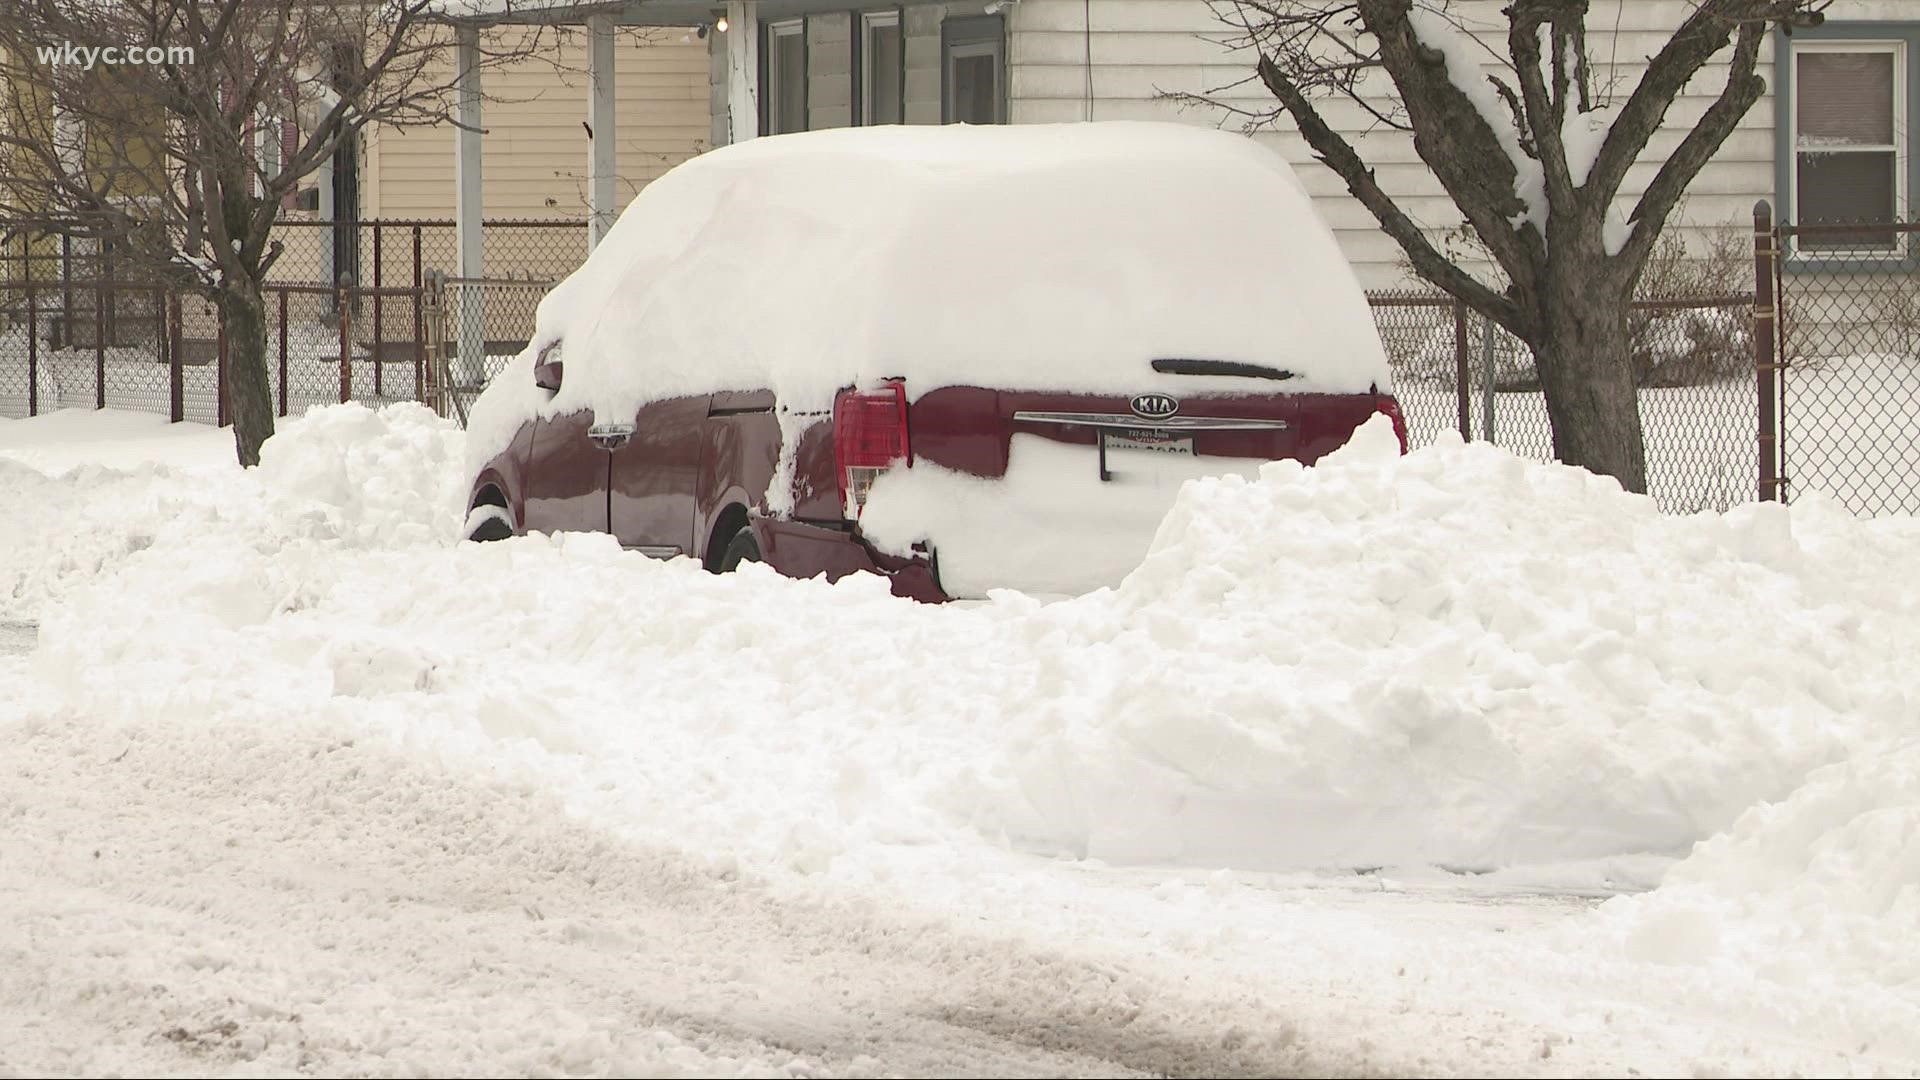 Some students are getting another snow day as the cleanup continues from Monday's winter storm.